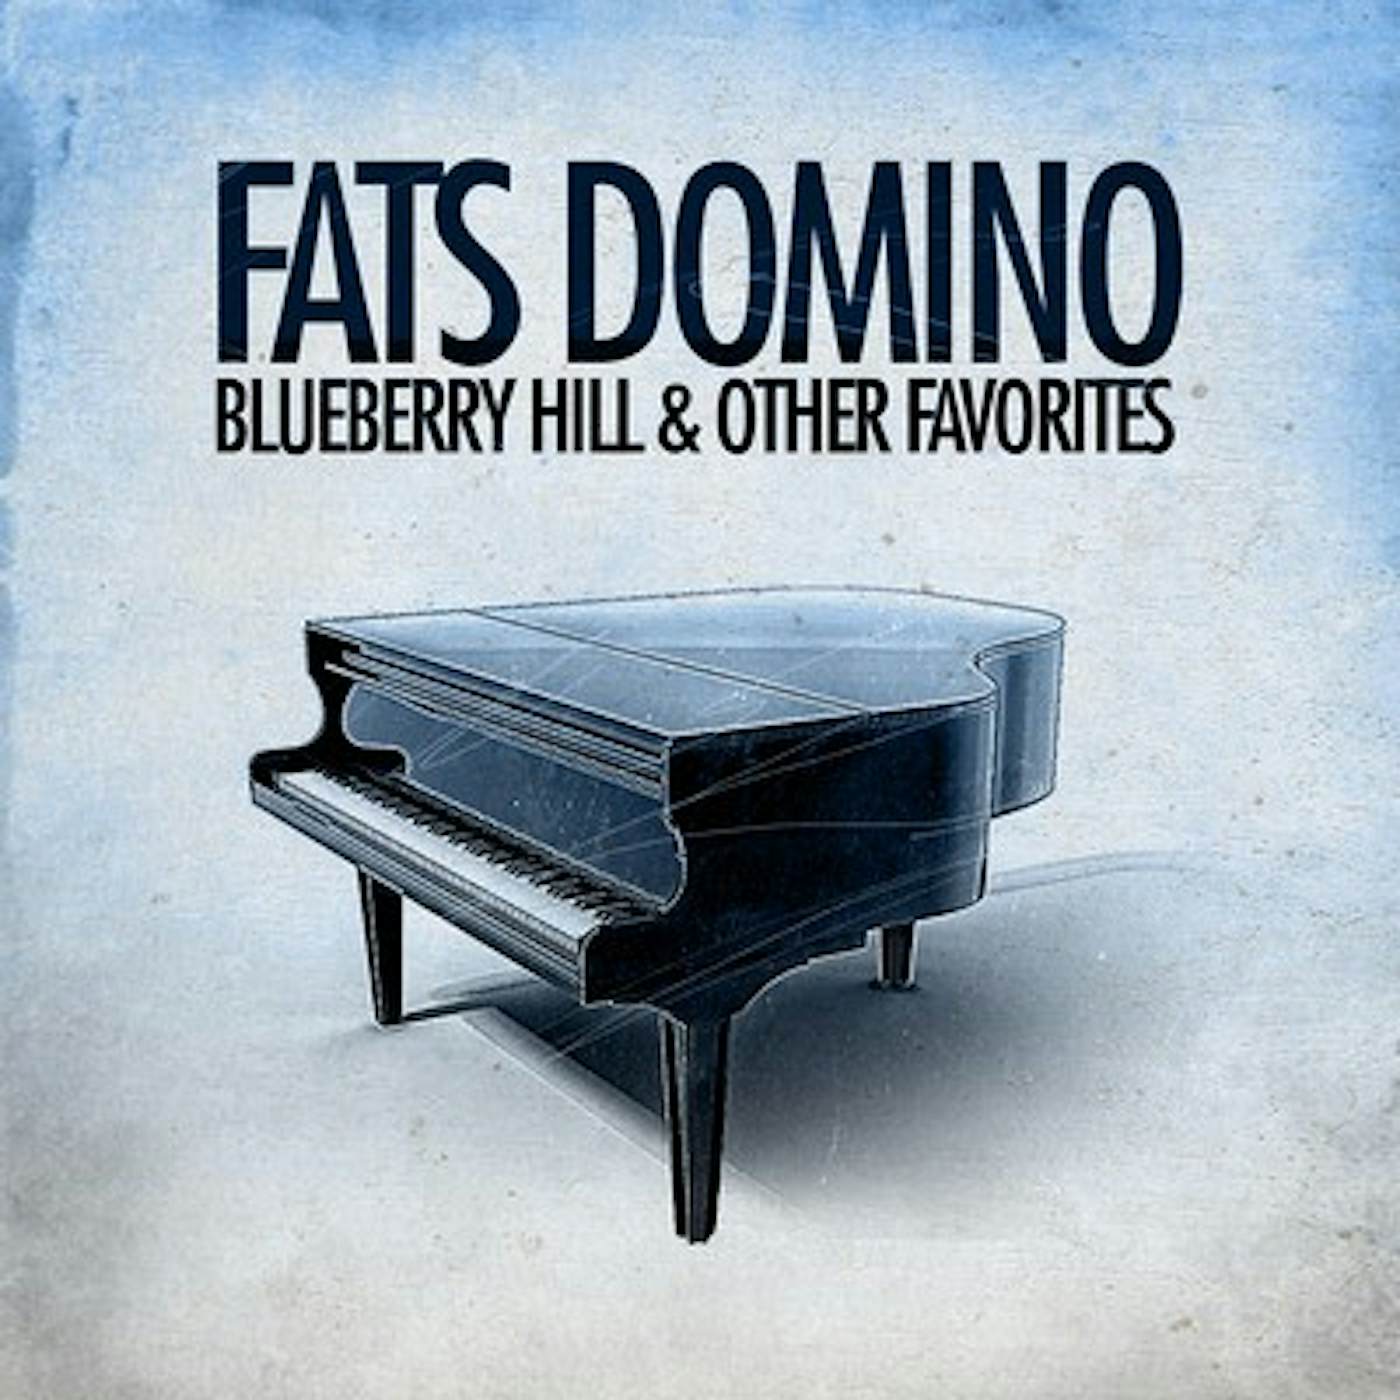 Fats Domino BLUEBERRY HILL & OTHER FAVORITES CD